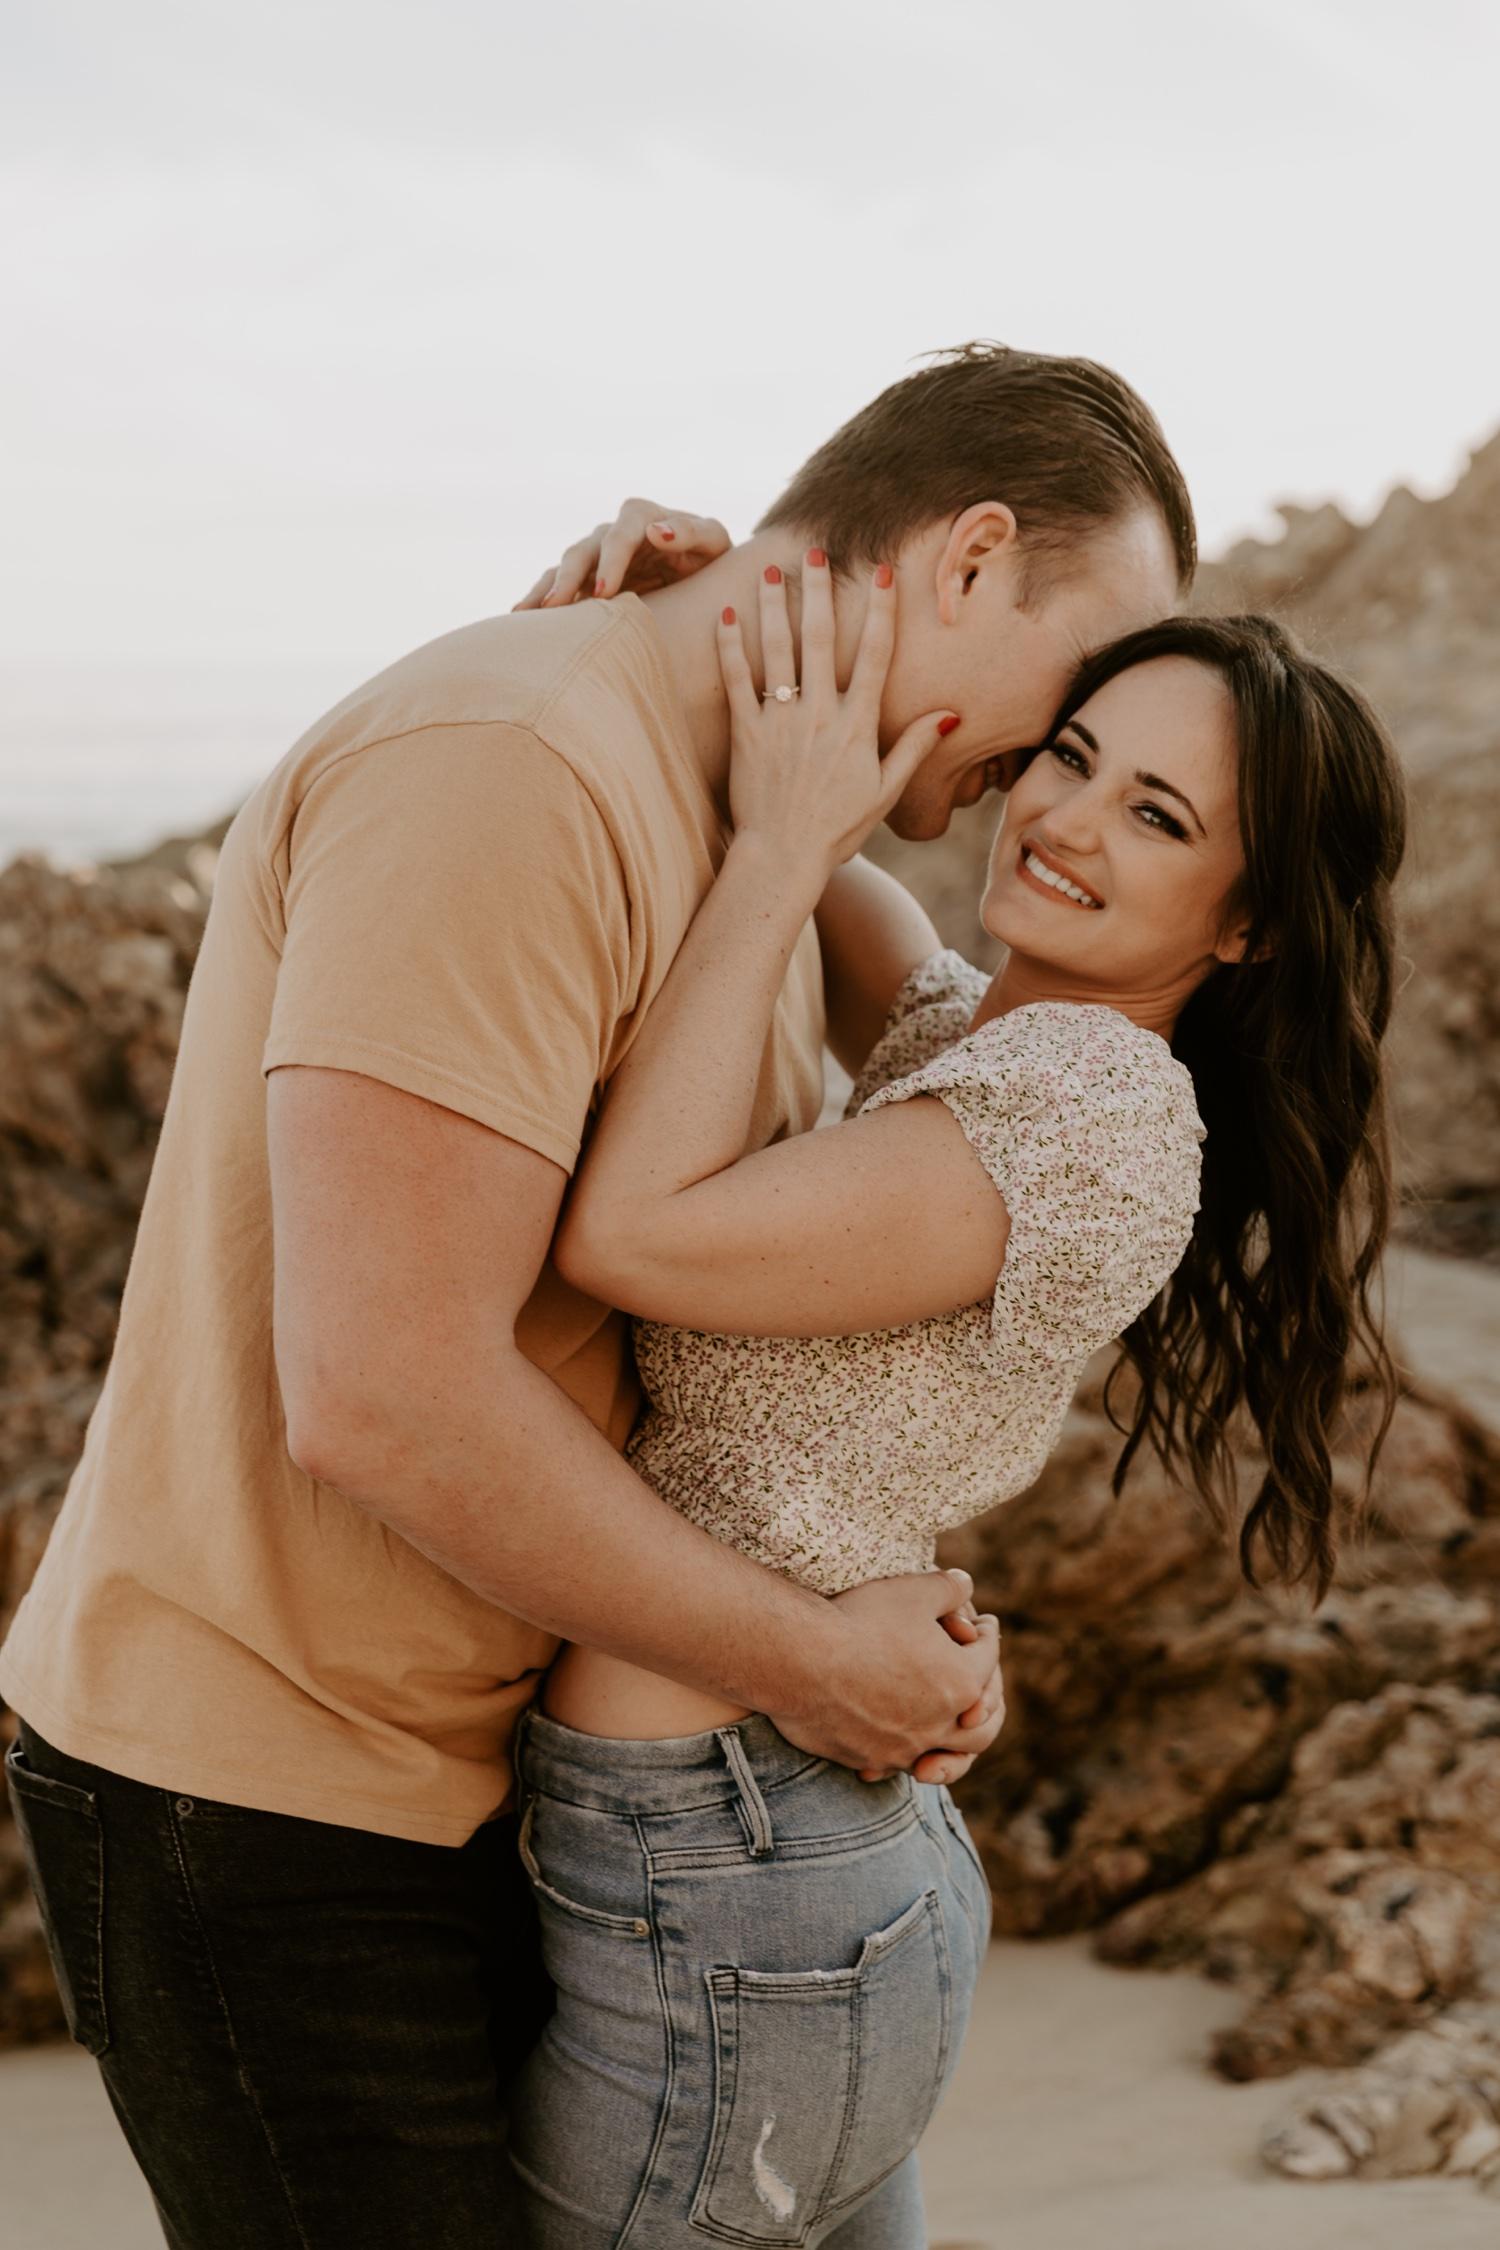 Outdoor Engagement Photos in the Gorgeous PNW | Haley & Spencer